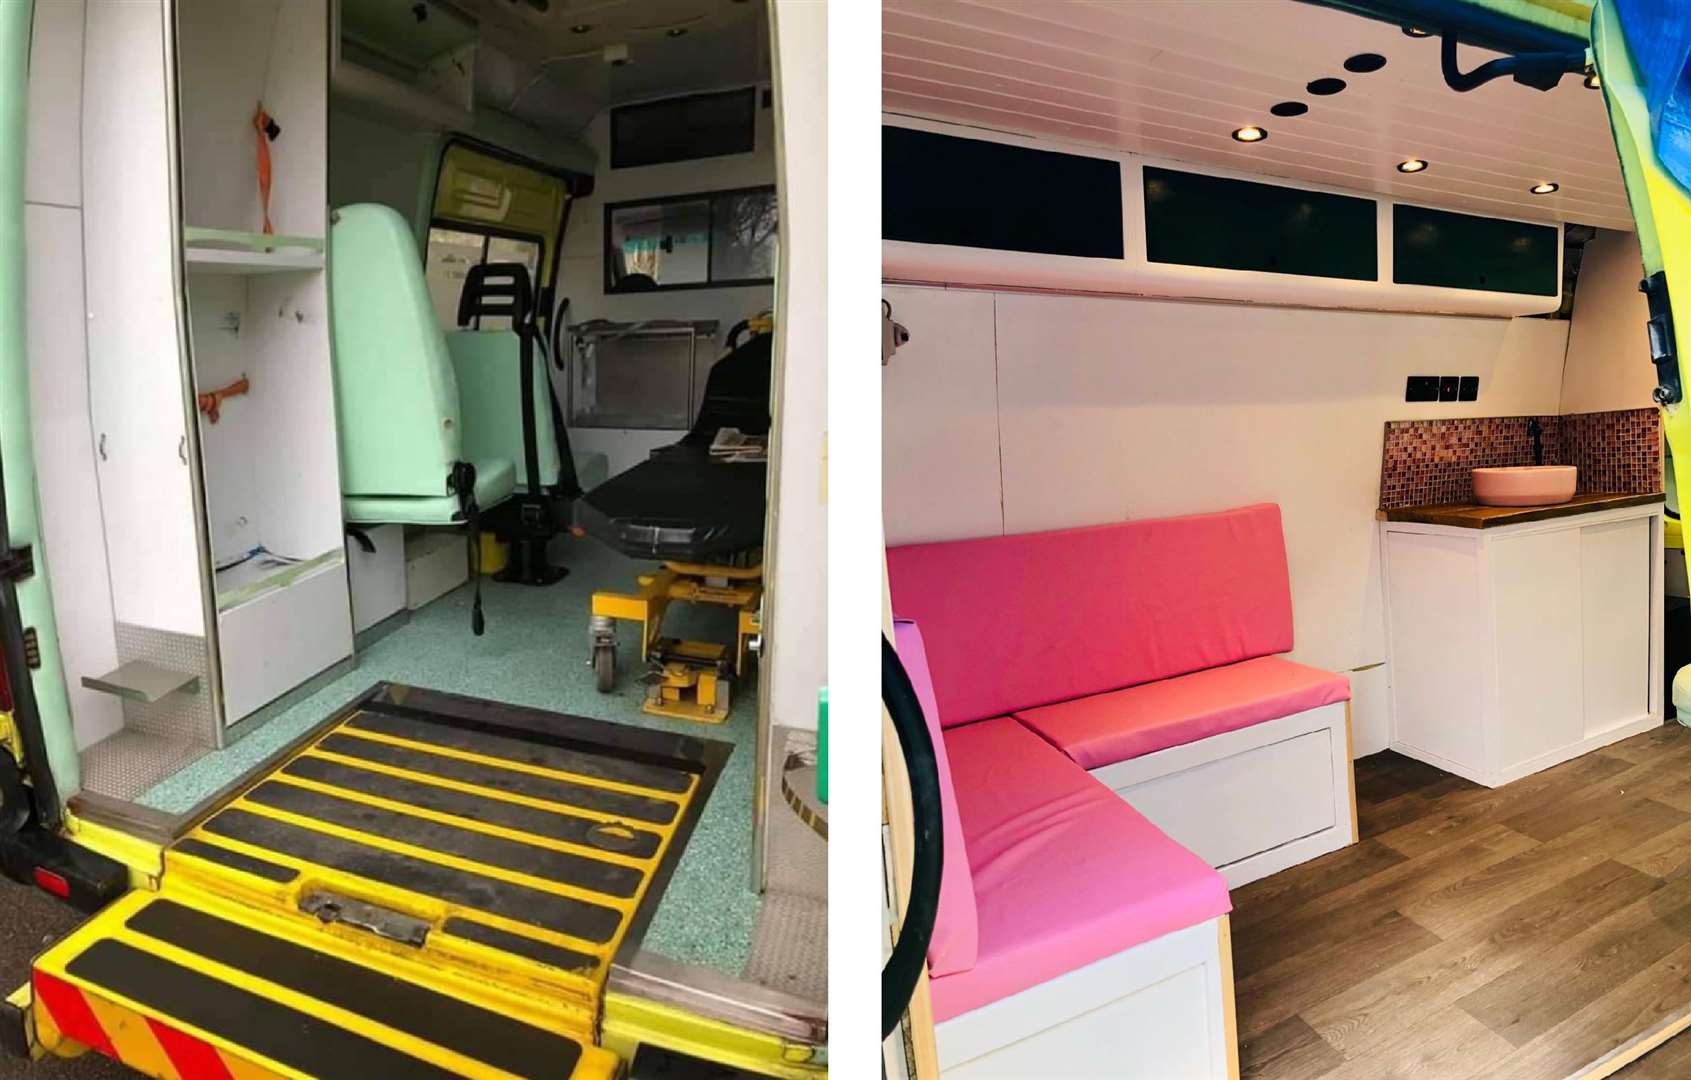 Glambulance before and after. Photos: Kirsty Martin